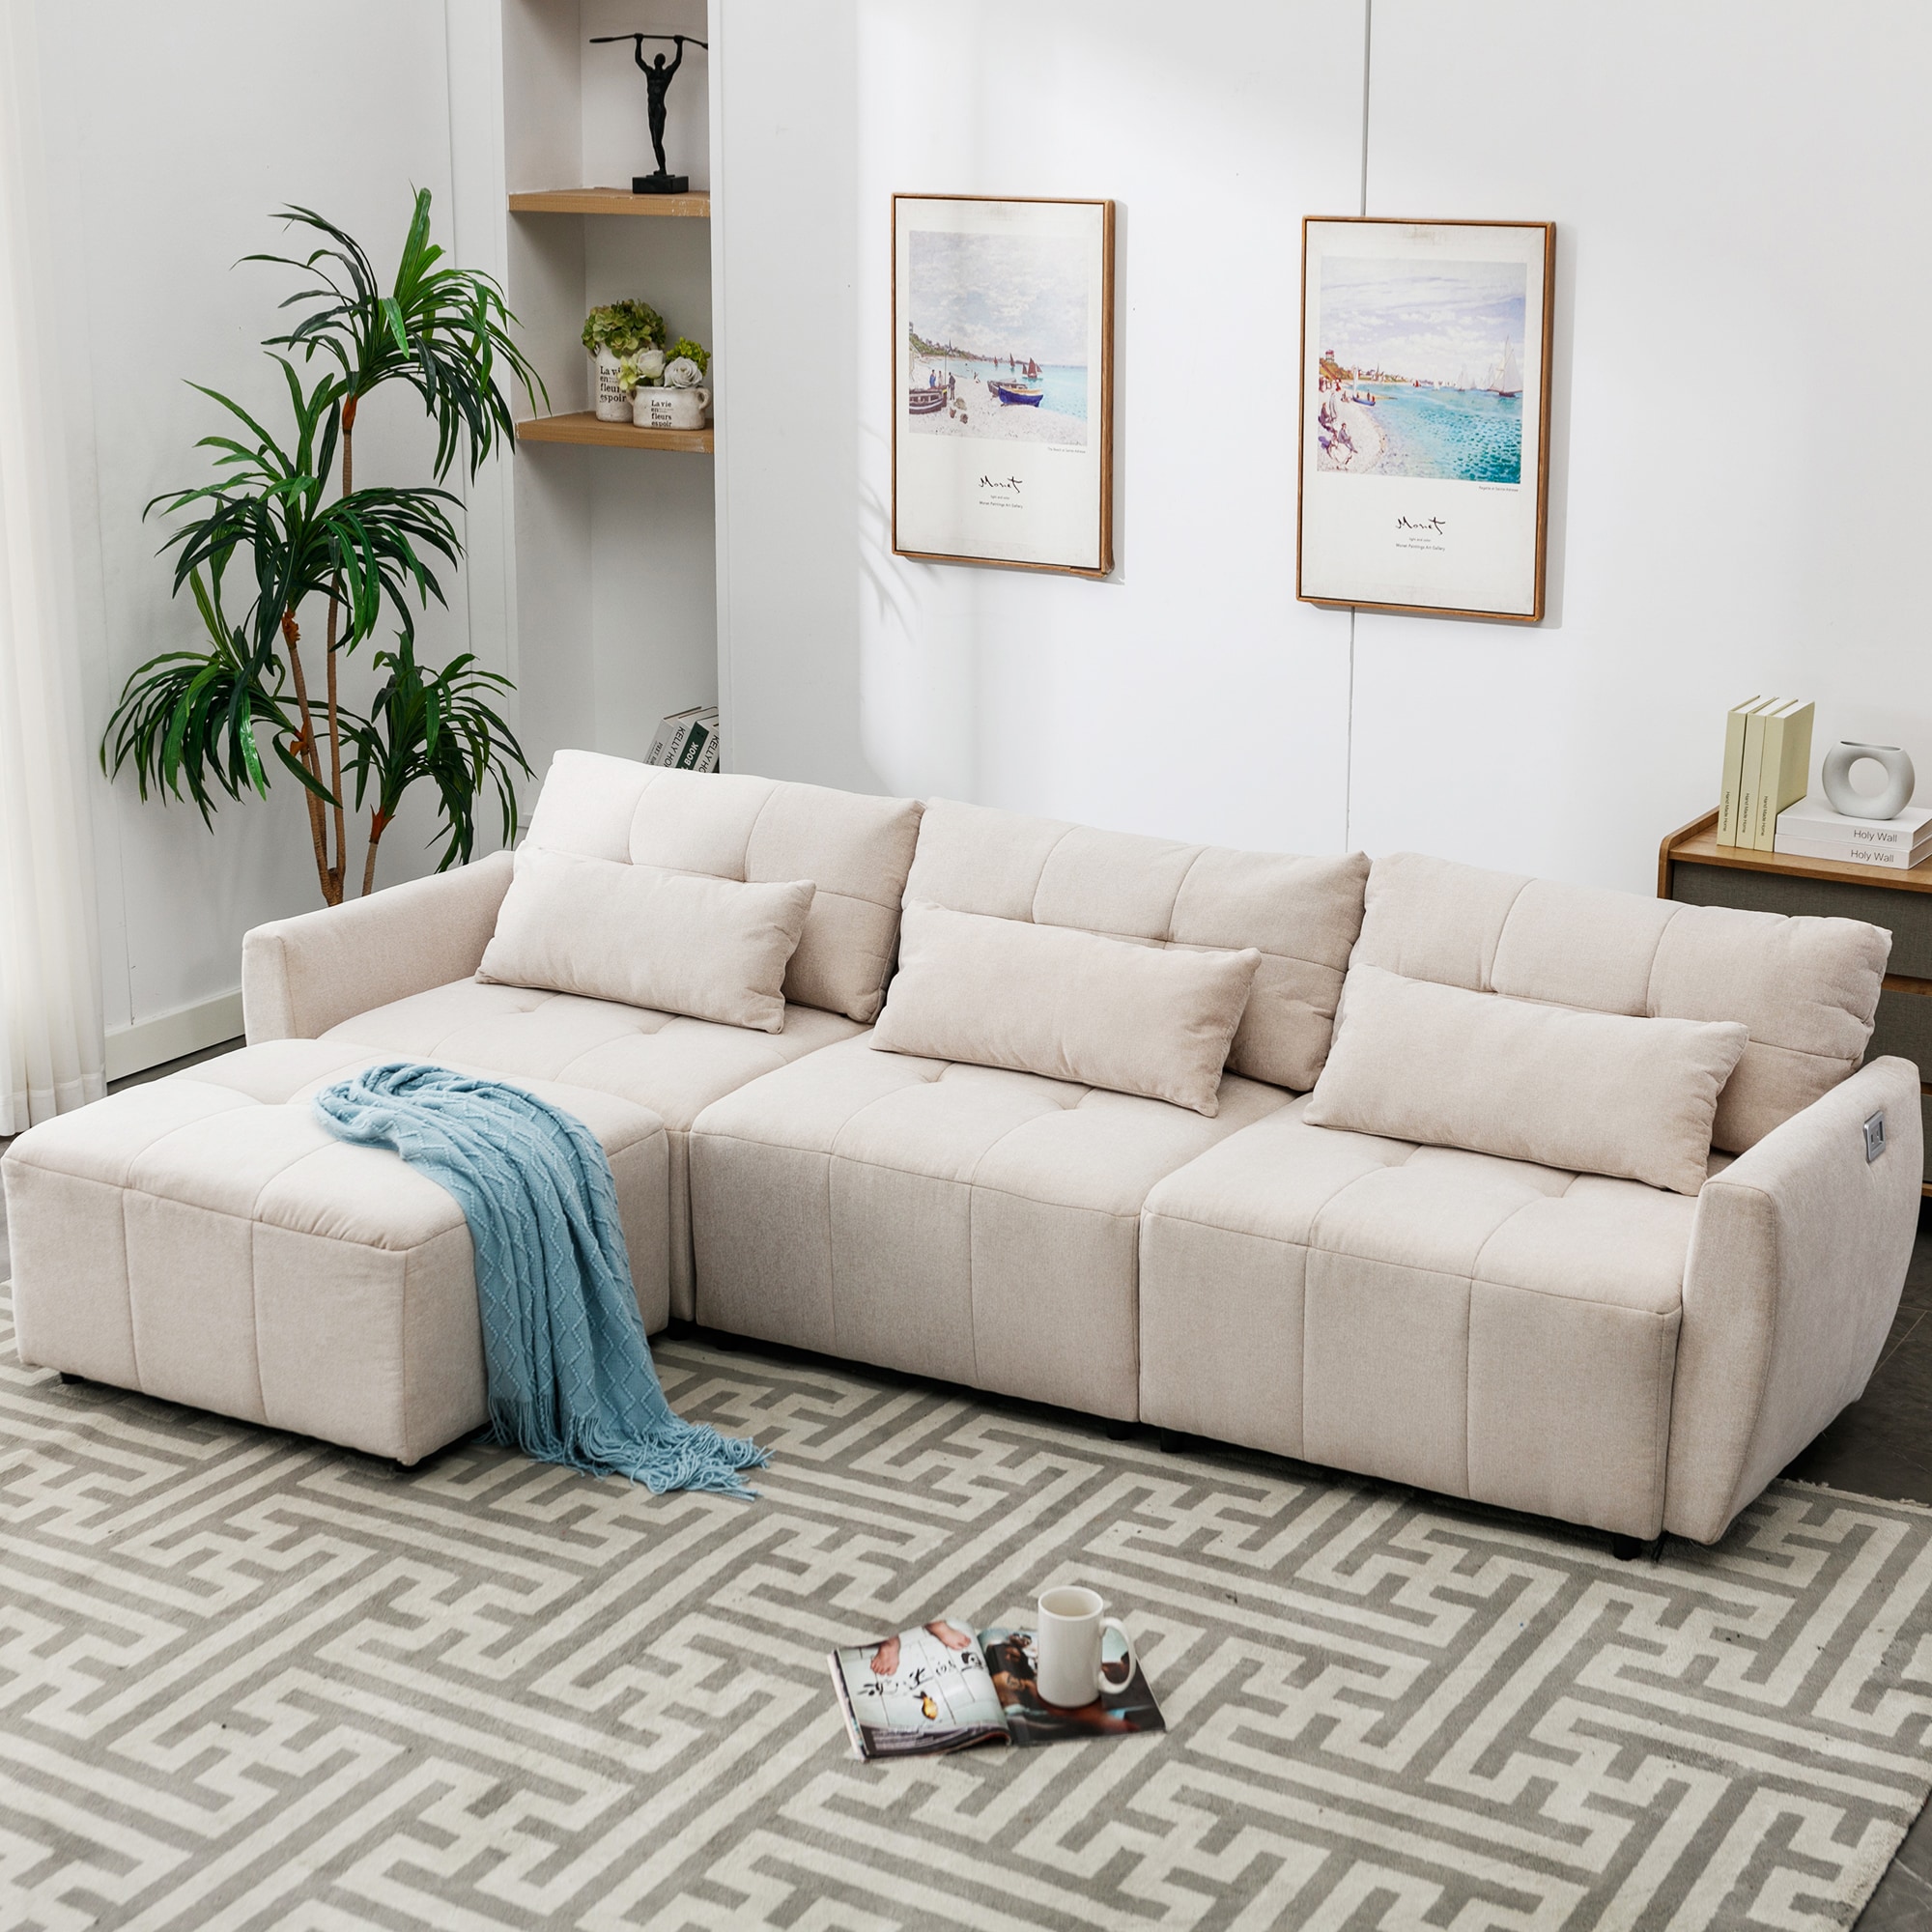 Clihome 3-Seat L-Shaped Sofa with Movable Ottoman 113.3-in Modern Beige ...